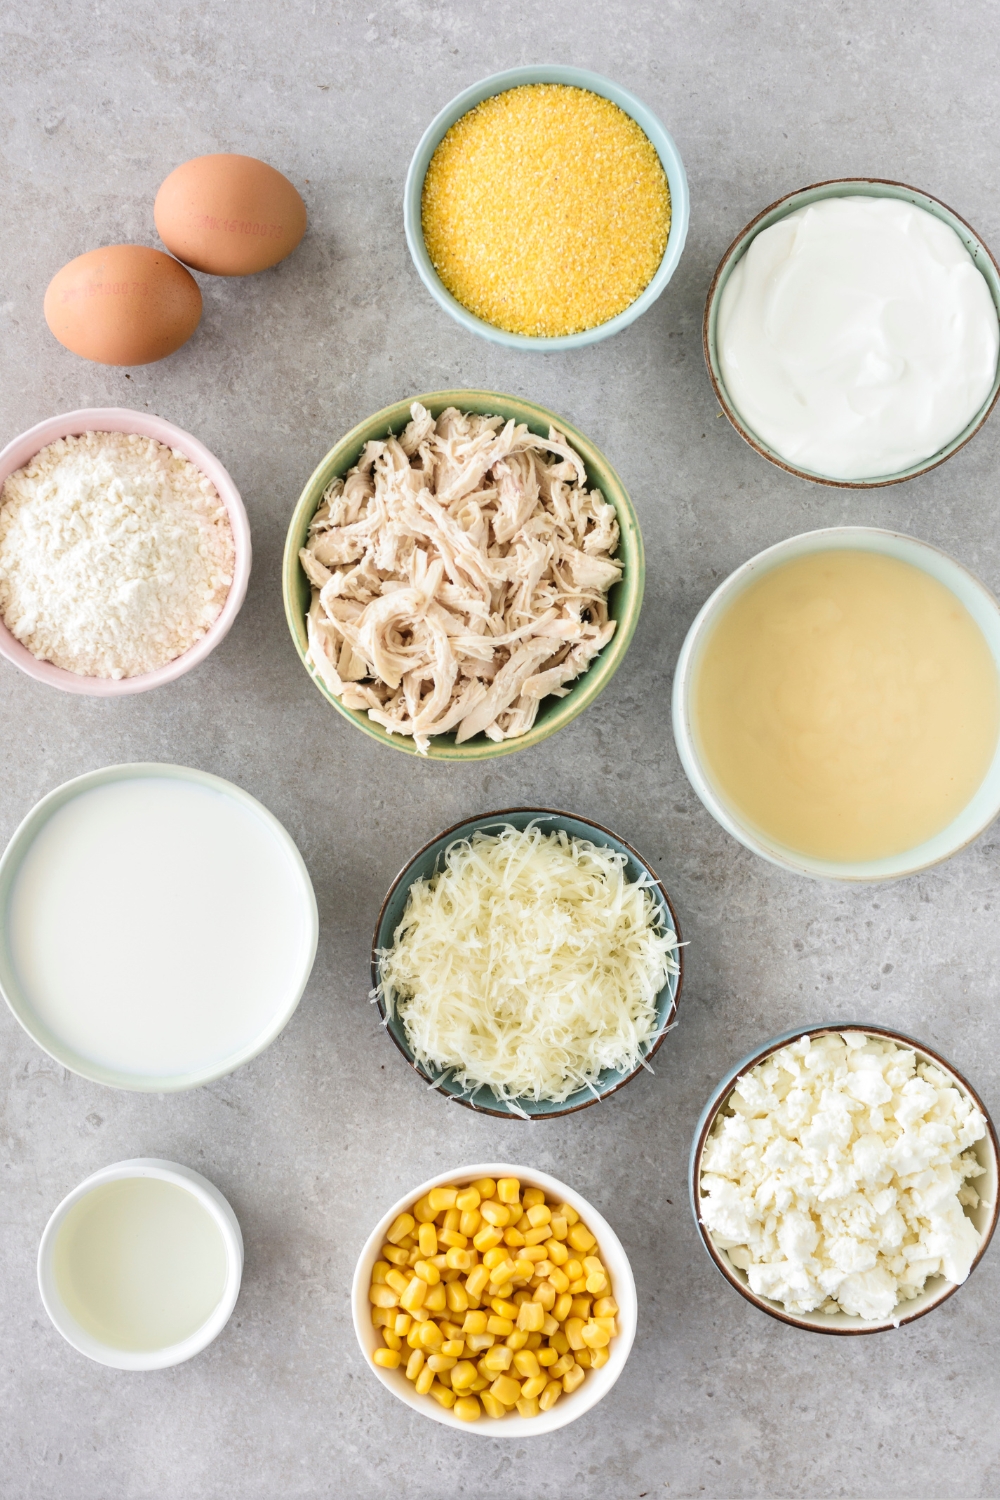 An assortment of ingredients including bowls of cornmeal, shredded chicken, flour, shredded cheese, whole corn kernels, feta cheese, yogurt, and two eggs.